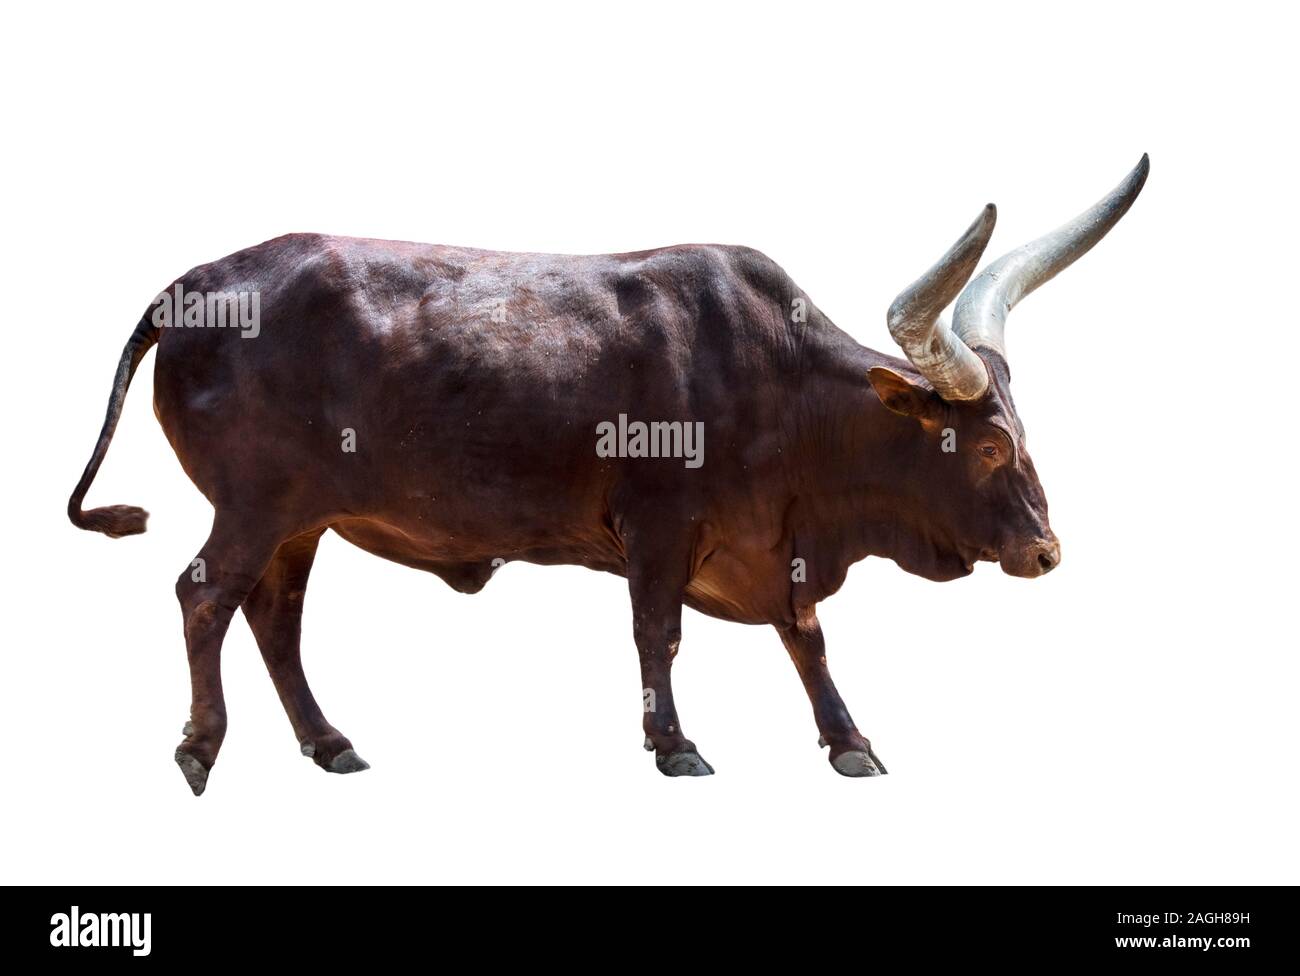 Ankole-Watusi bull, breed of domestic cattle of central Africa with enormous horns against white background Stock Photo